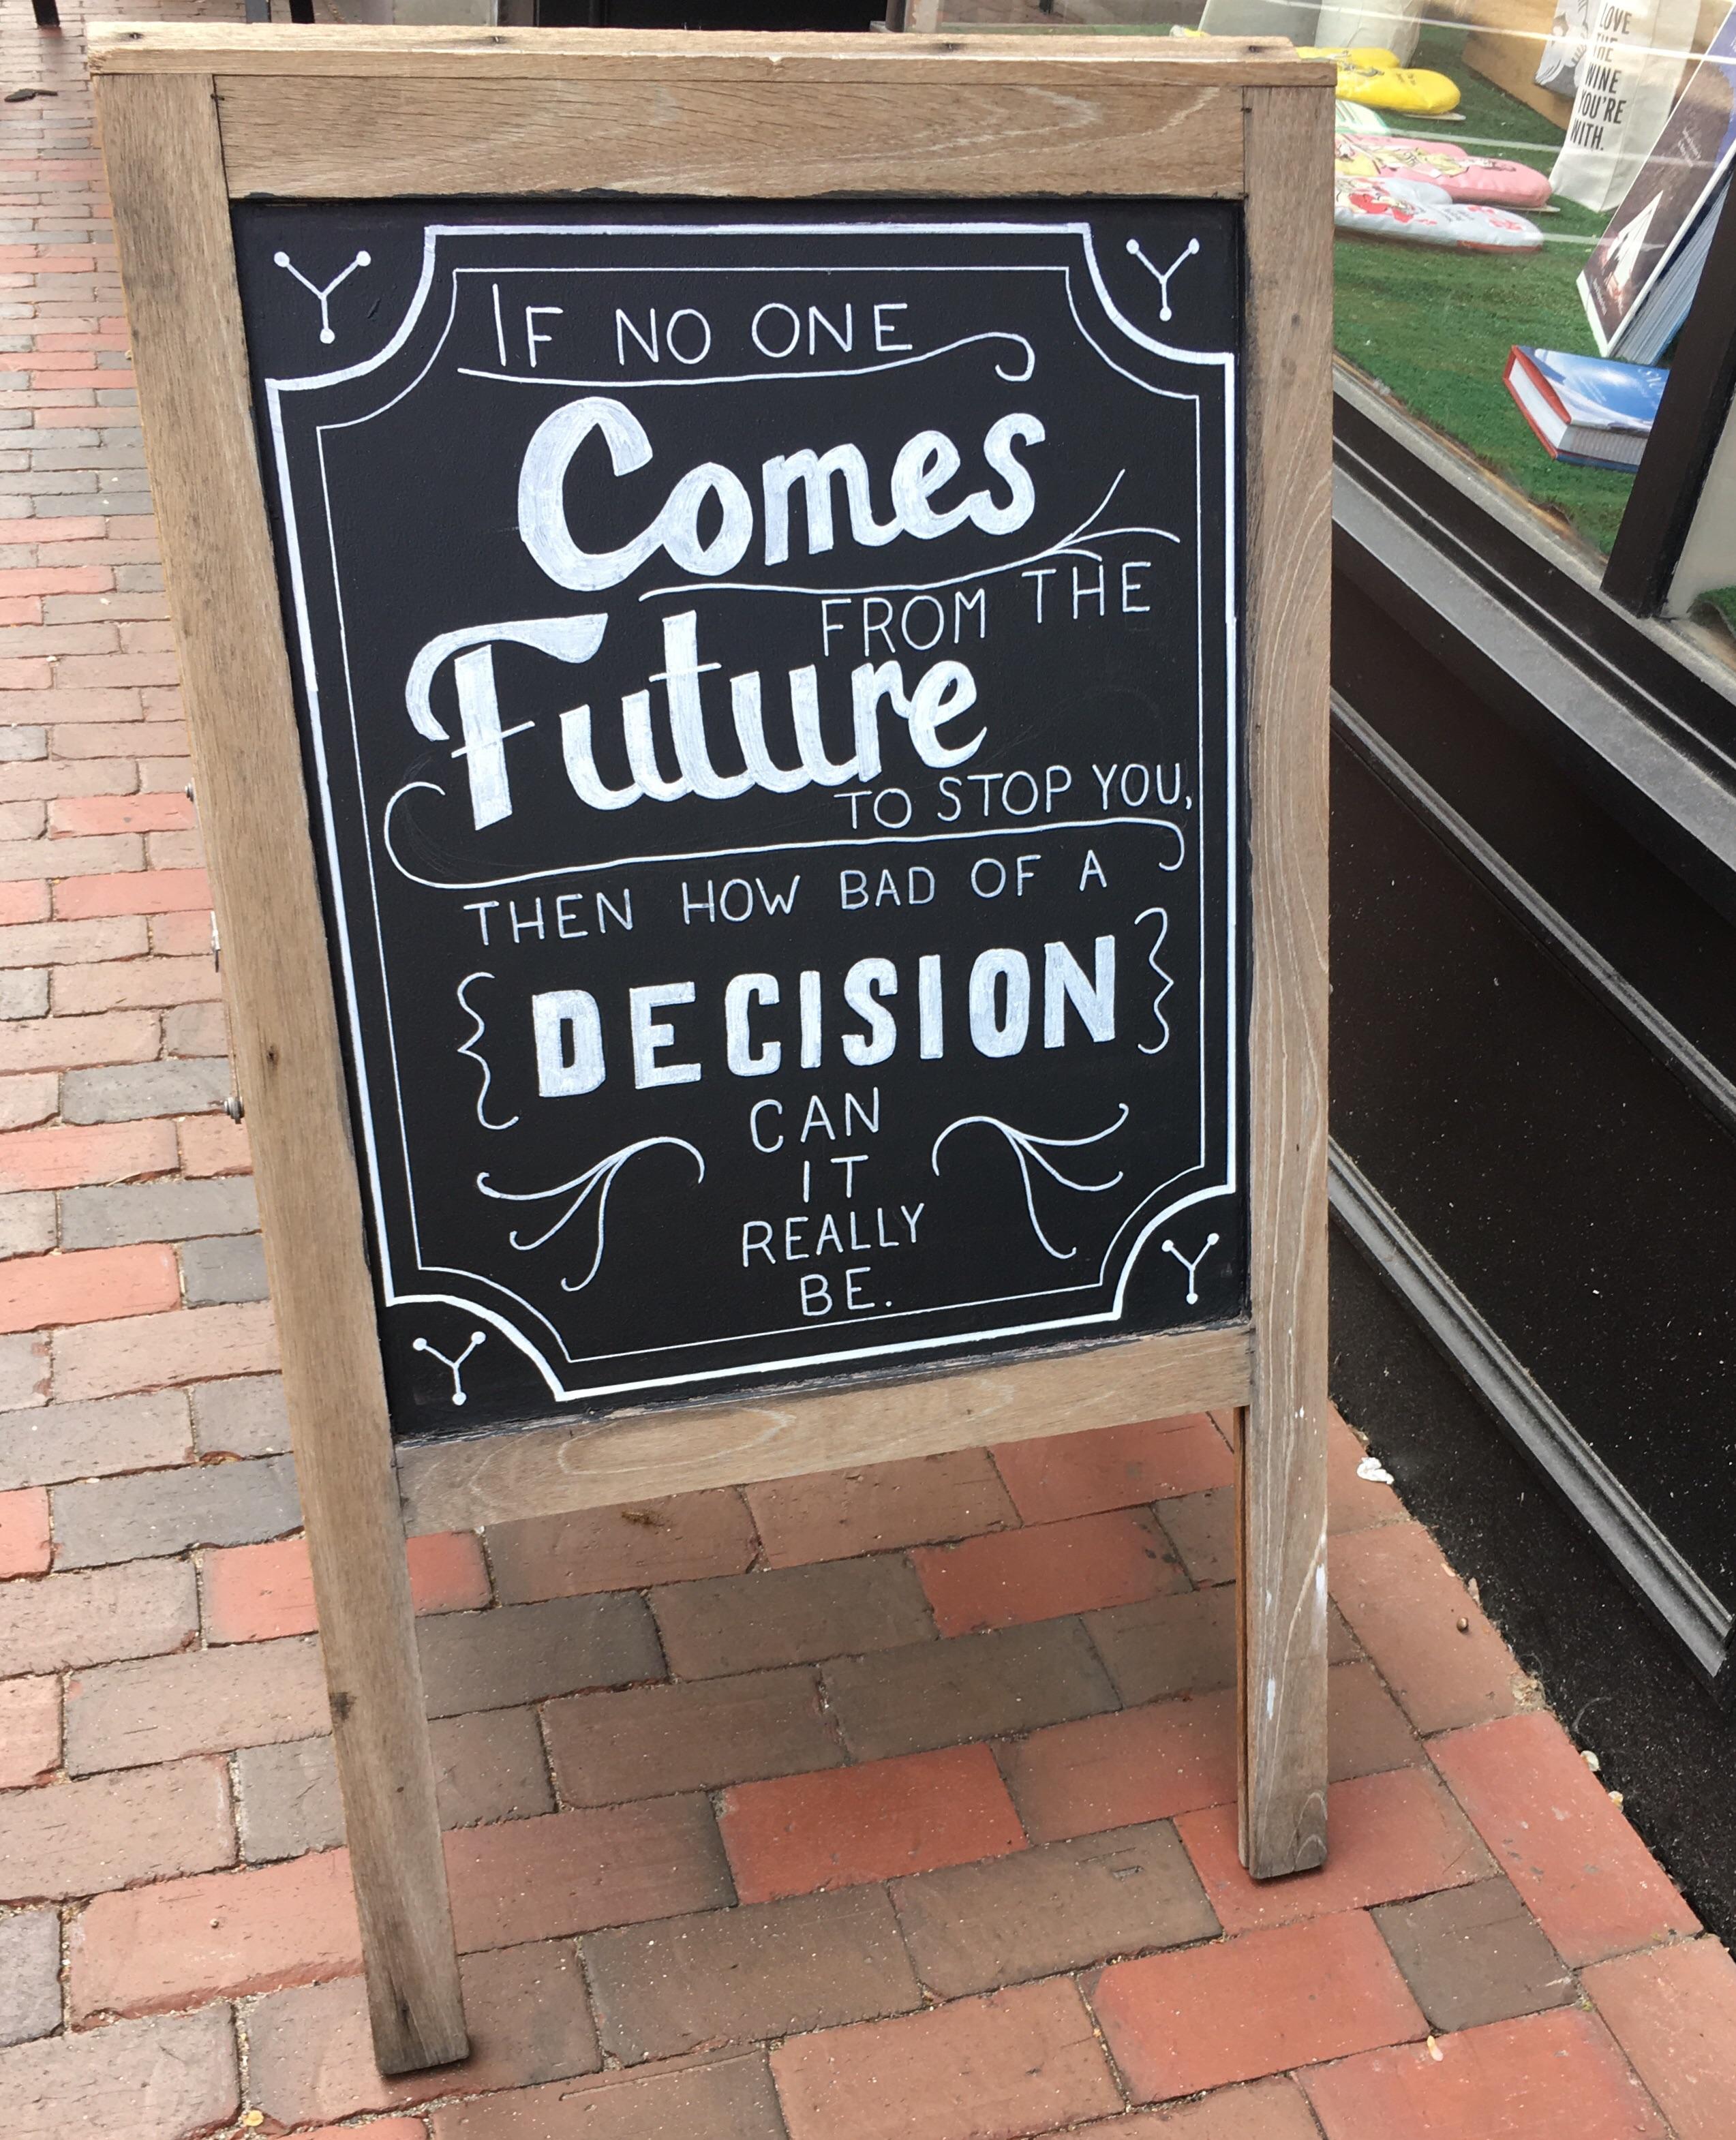 chalk - If No One Comes Future From The To Stop You. Then How Bad Of A 3 Decision Can Really It